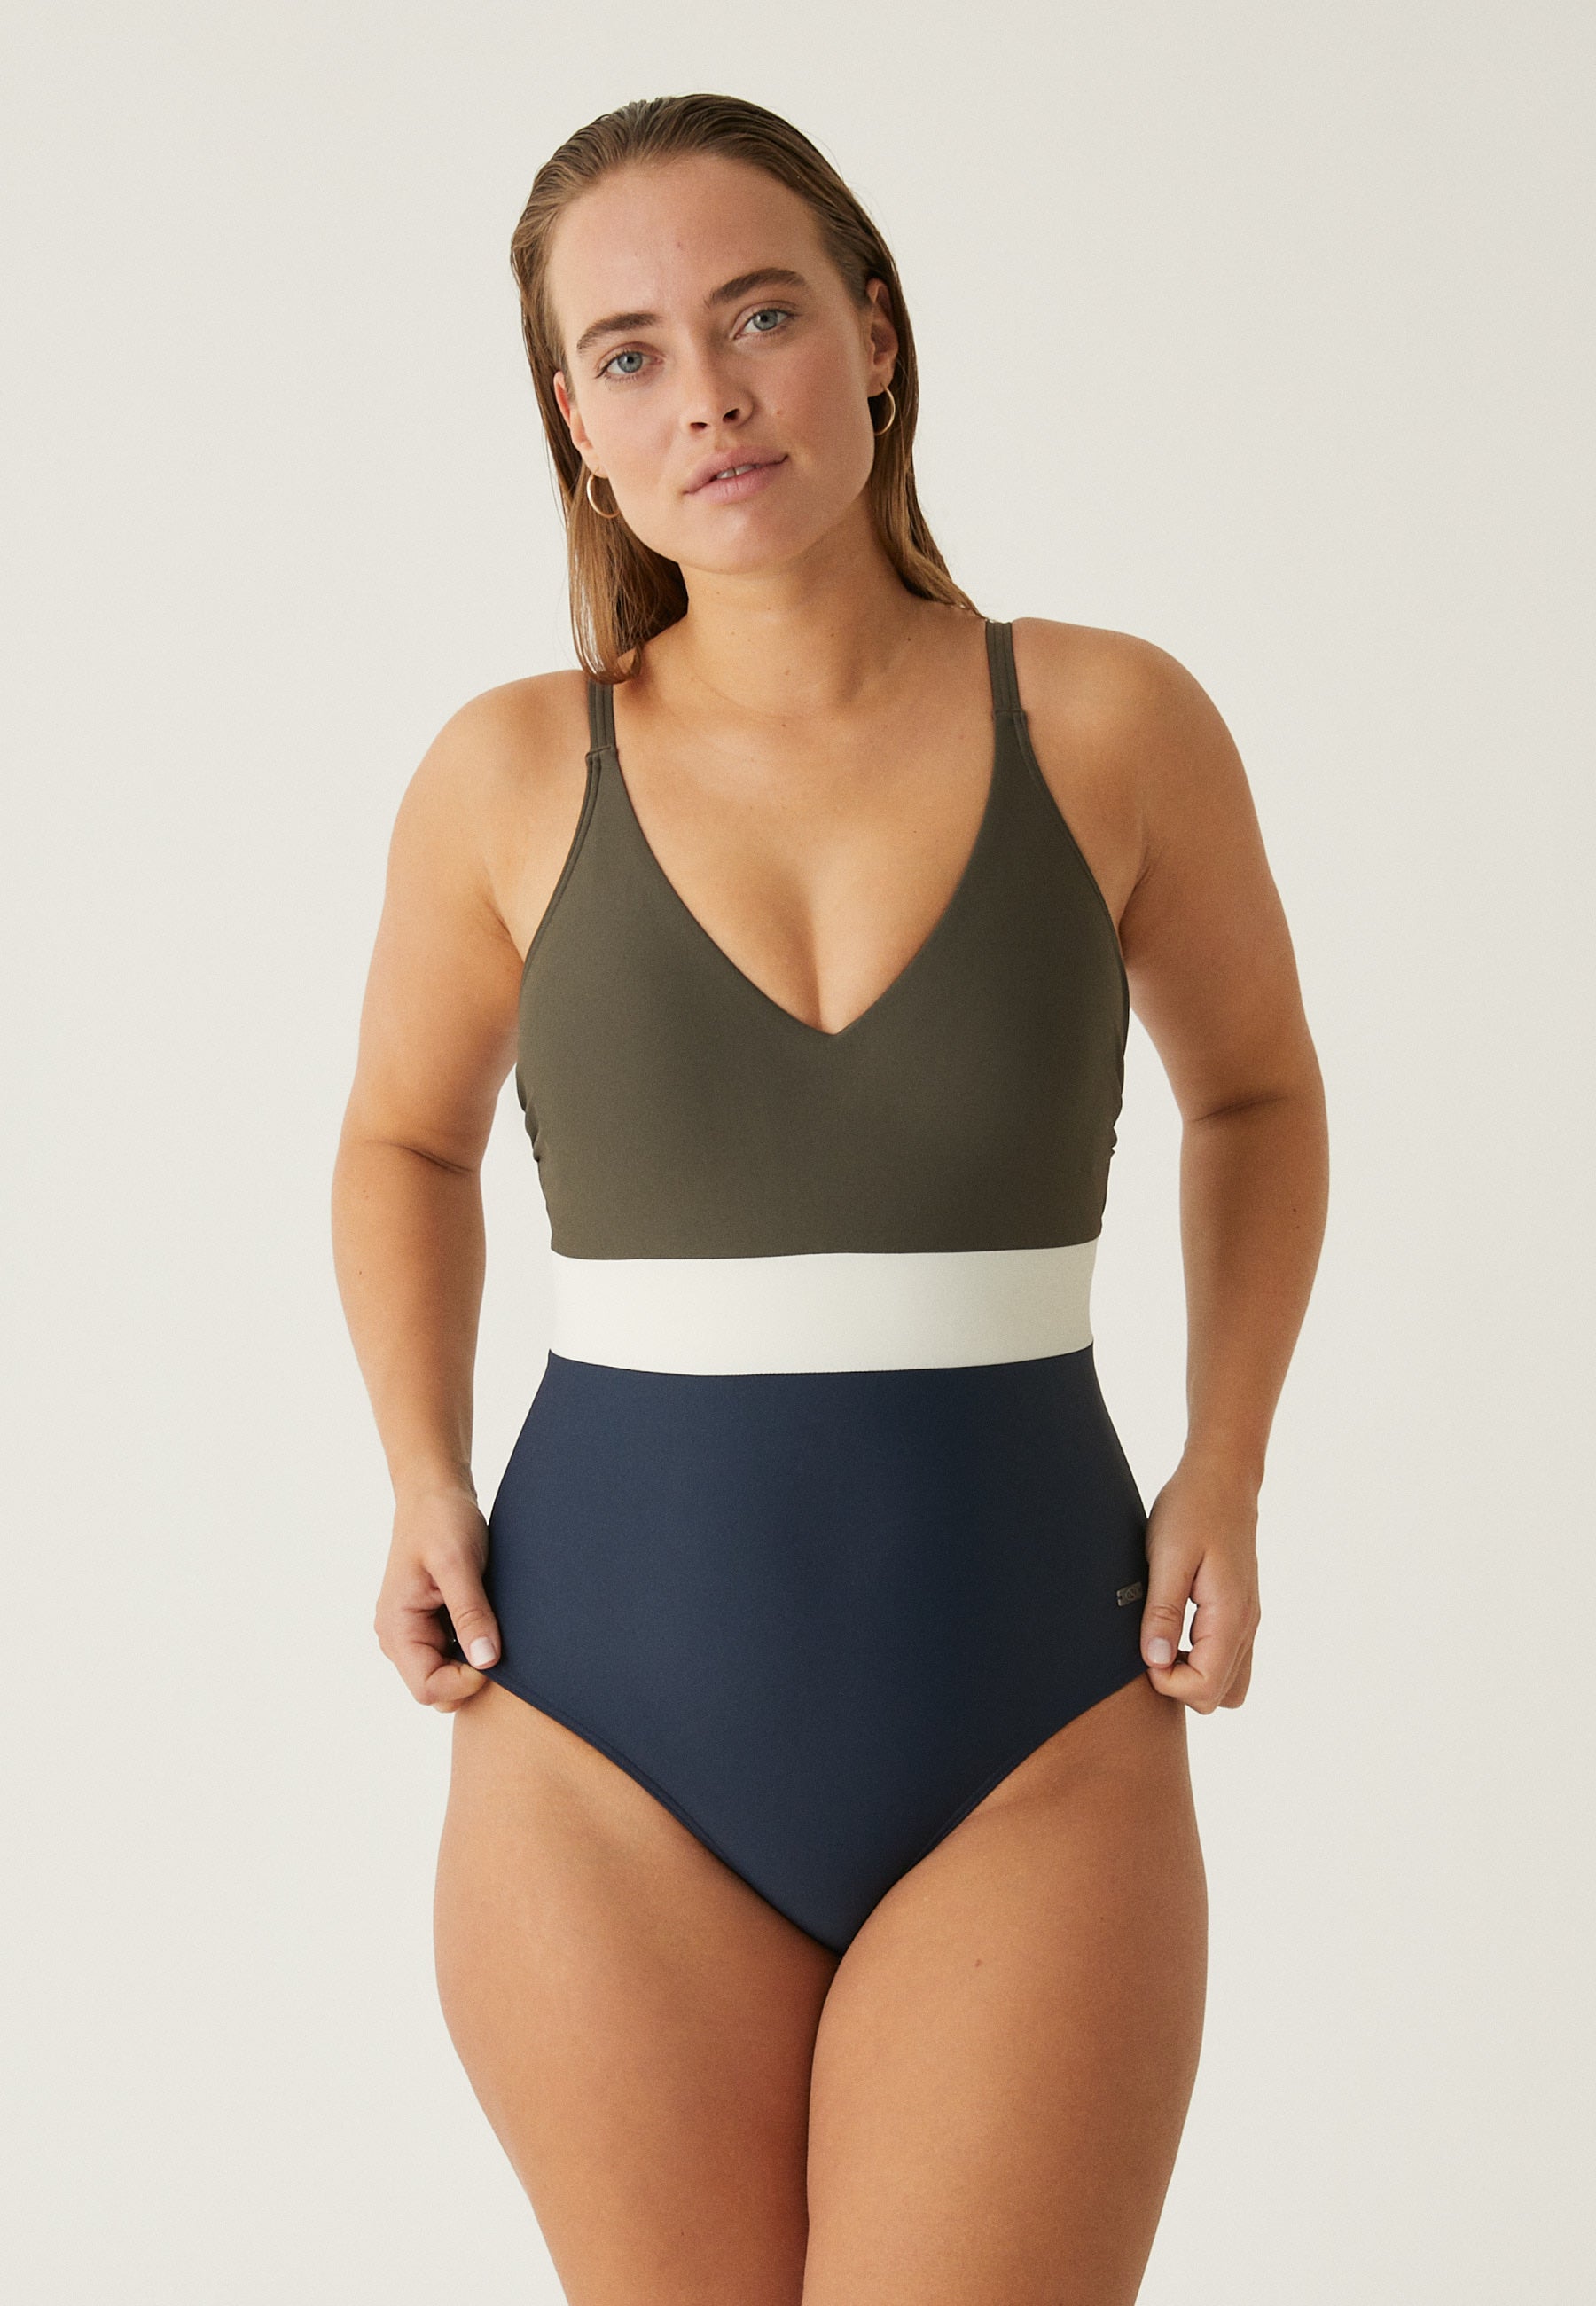 Bathing Suit with Cups - Navy/Khaki